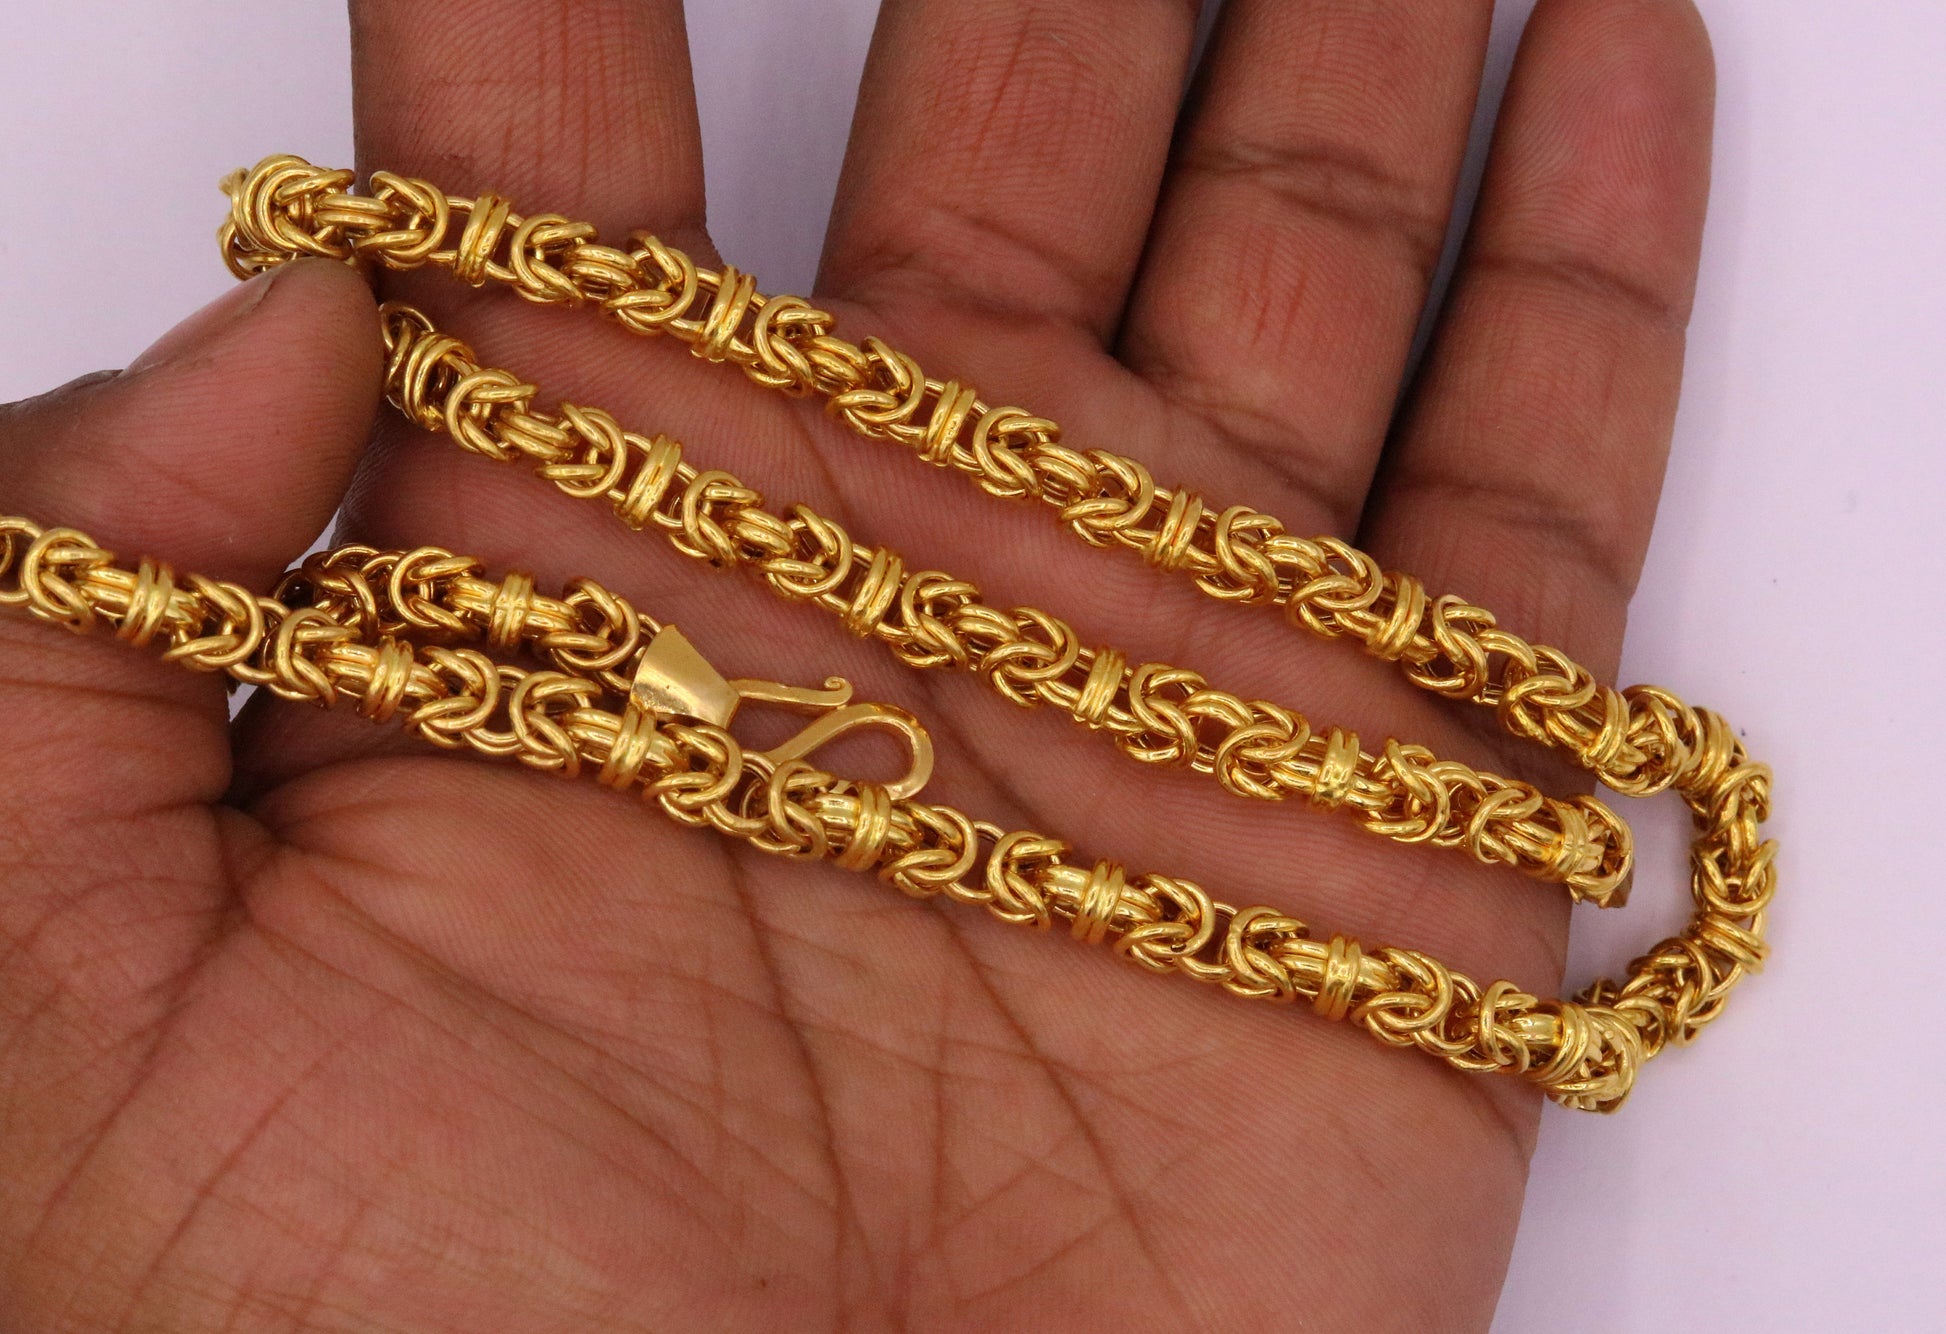 Certified 22kt yellow gold handmade fabulous byzantine amazing chain necklace unisex gifting jewelry from rajasthan india - TRIBAL ORNAMENTS